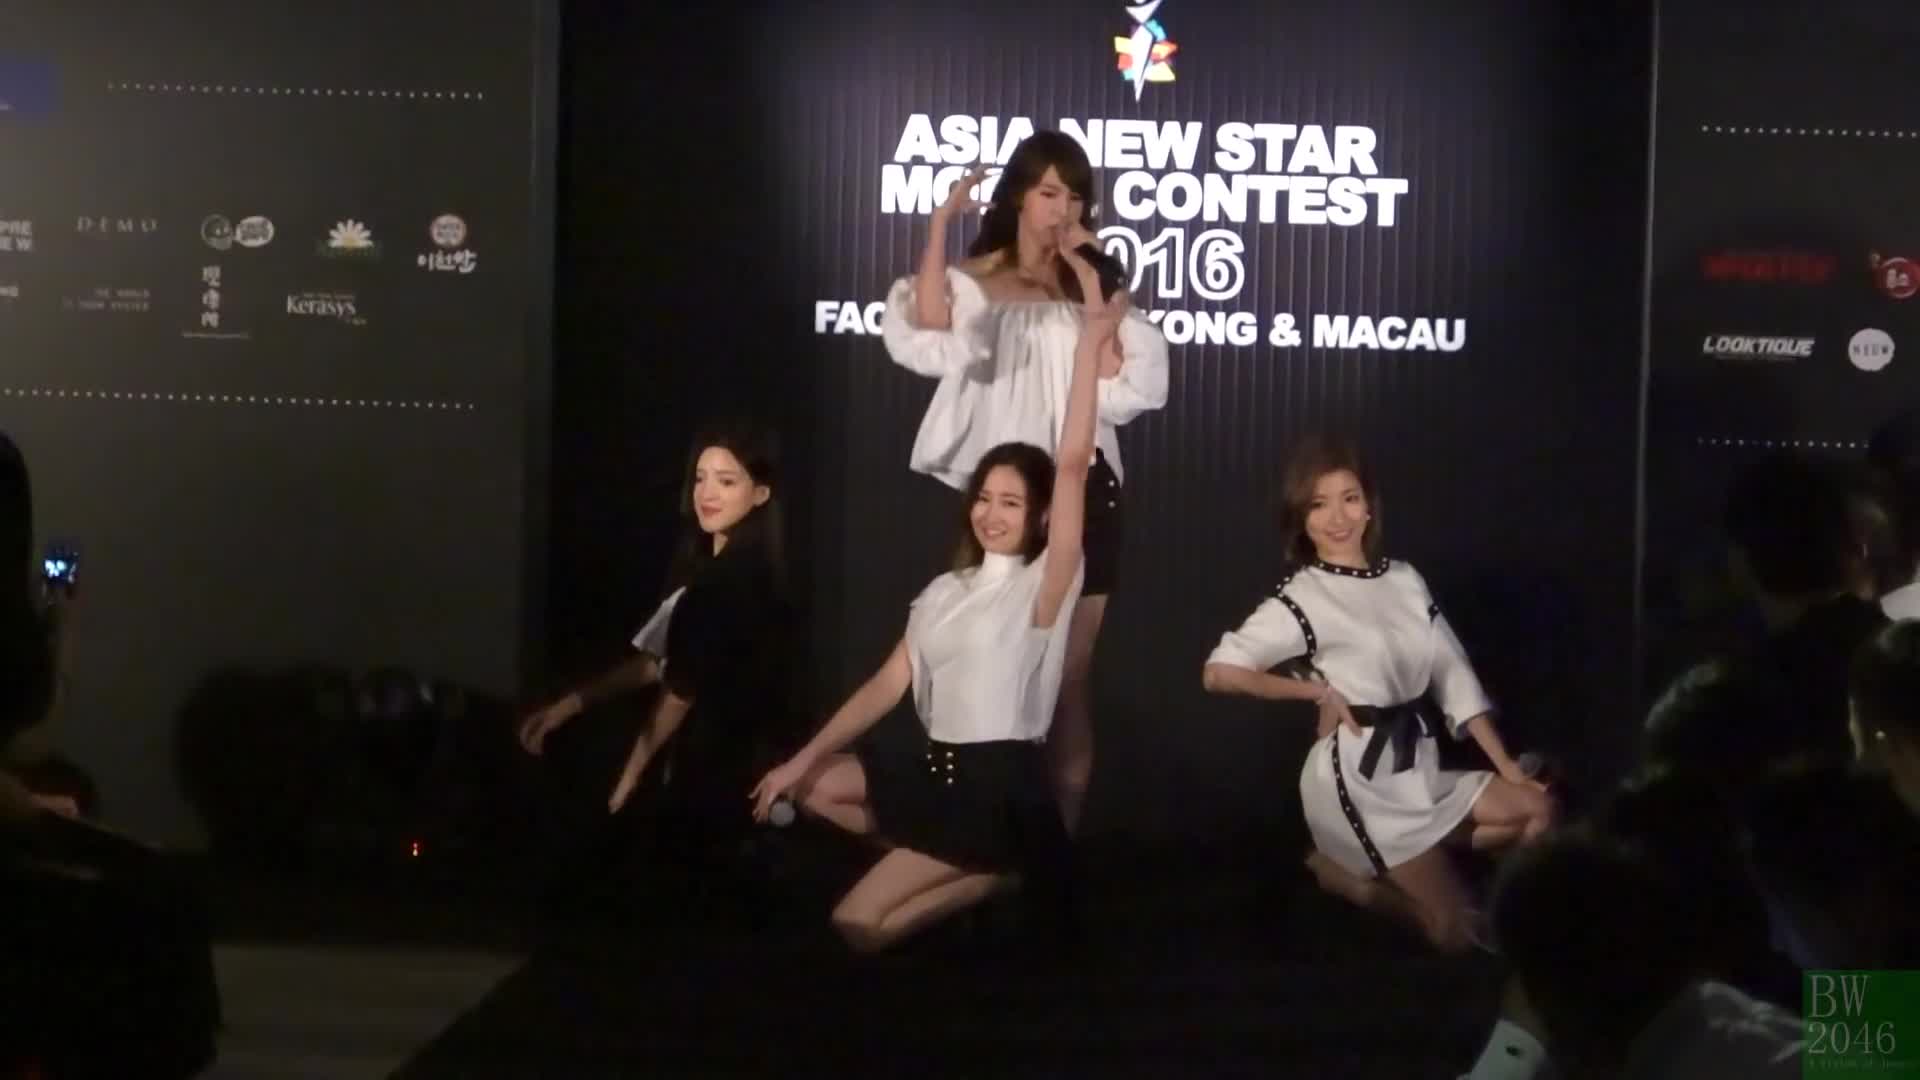 160419 As One ‎에즈 – Candy Ball 캔디볼 @ Asia New Star Model Contest 2016 Face of Hong Kong and Macau